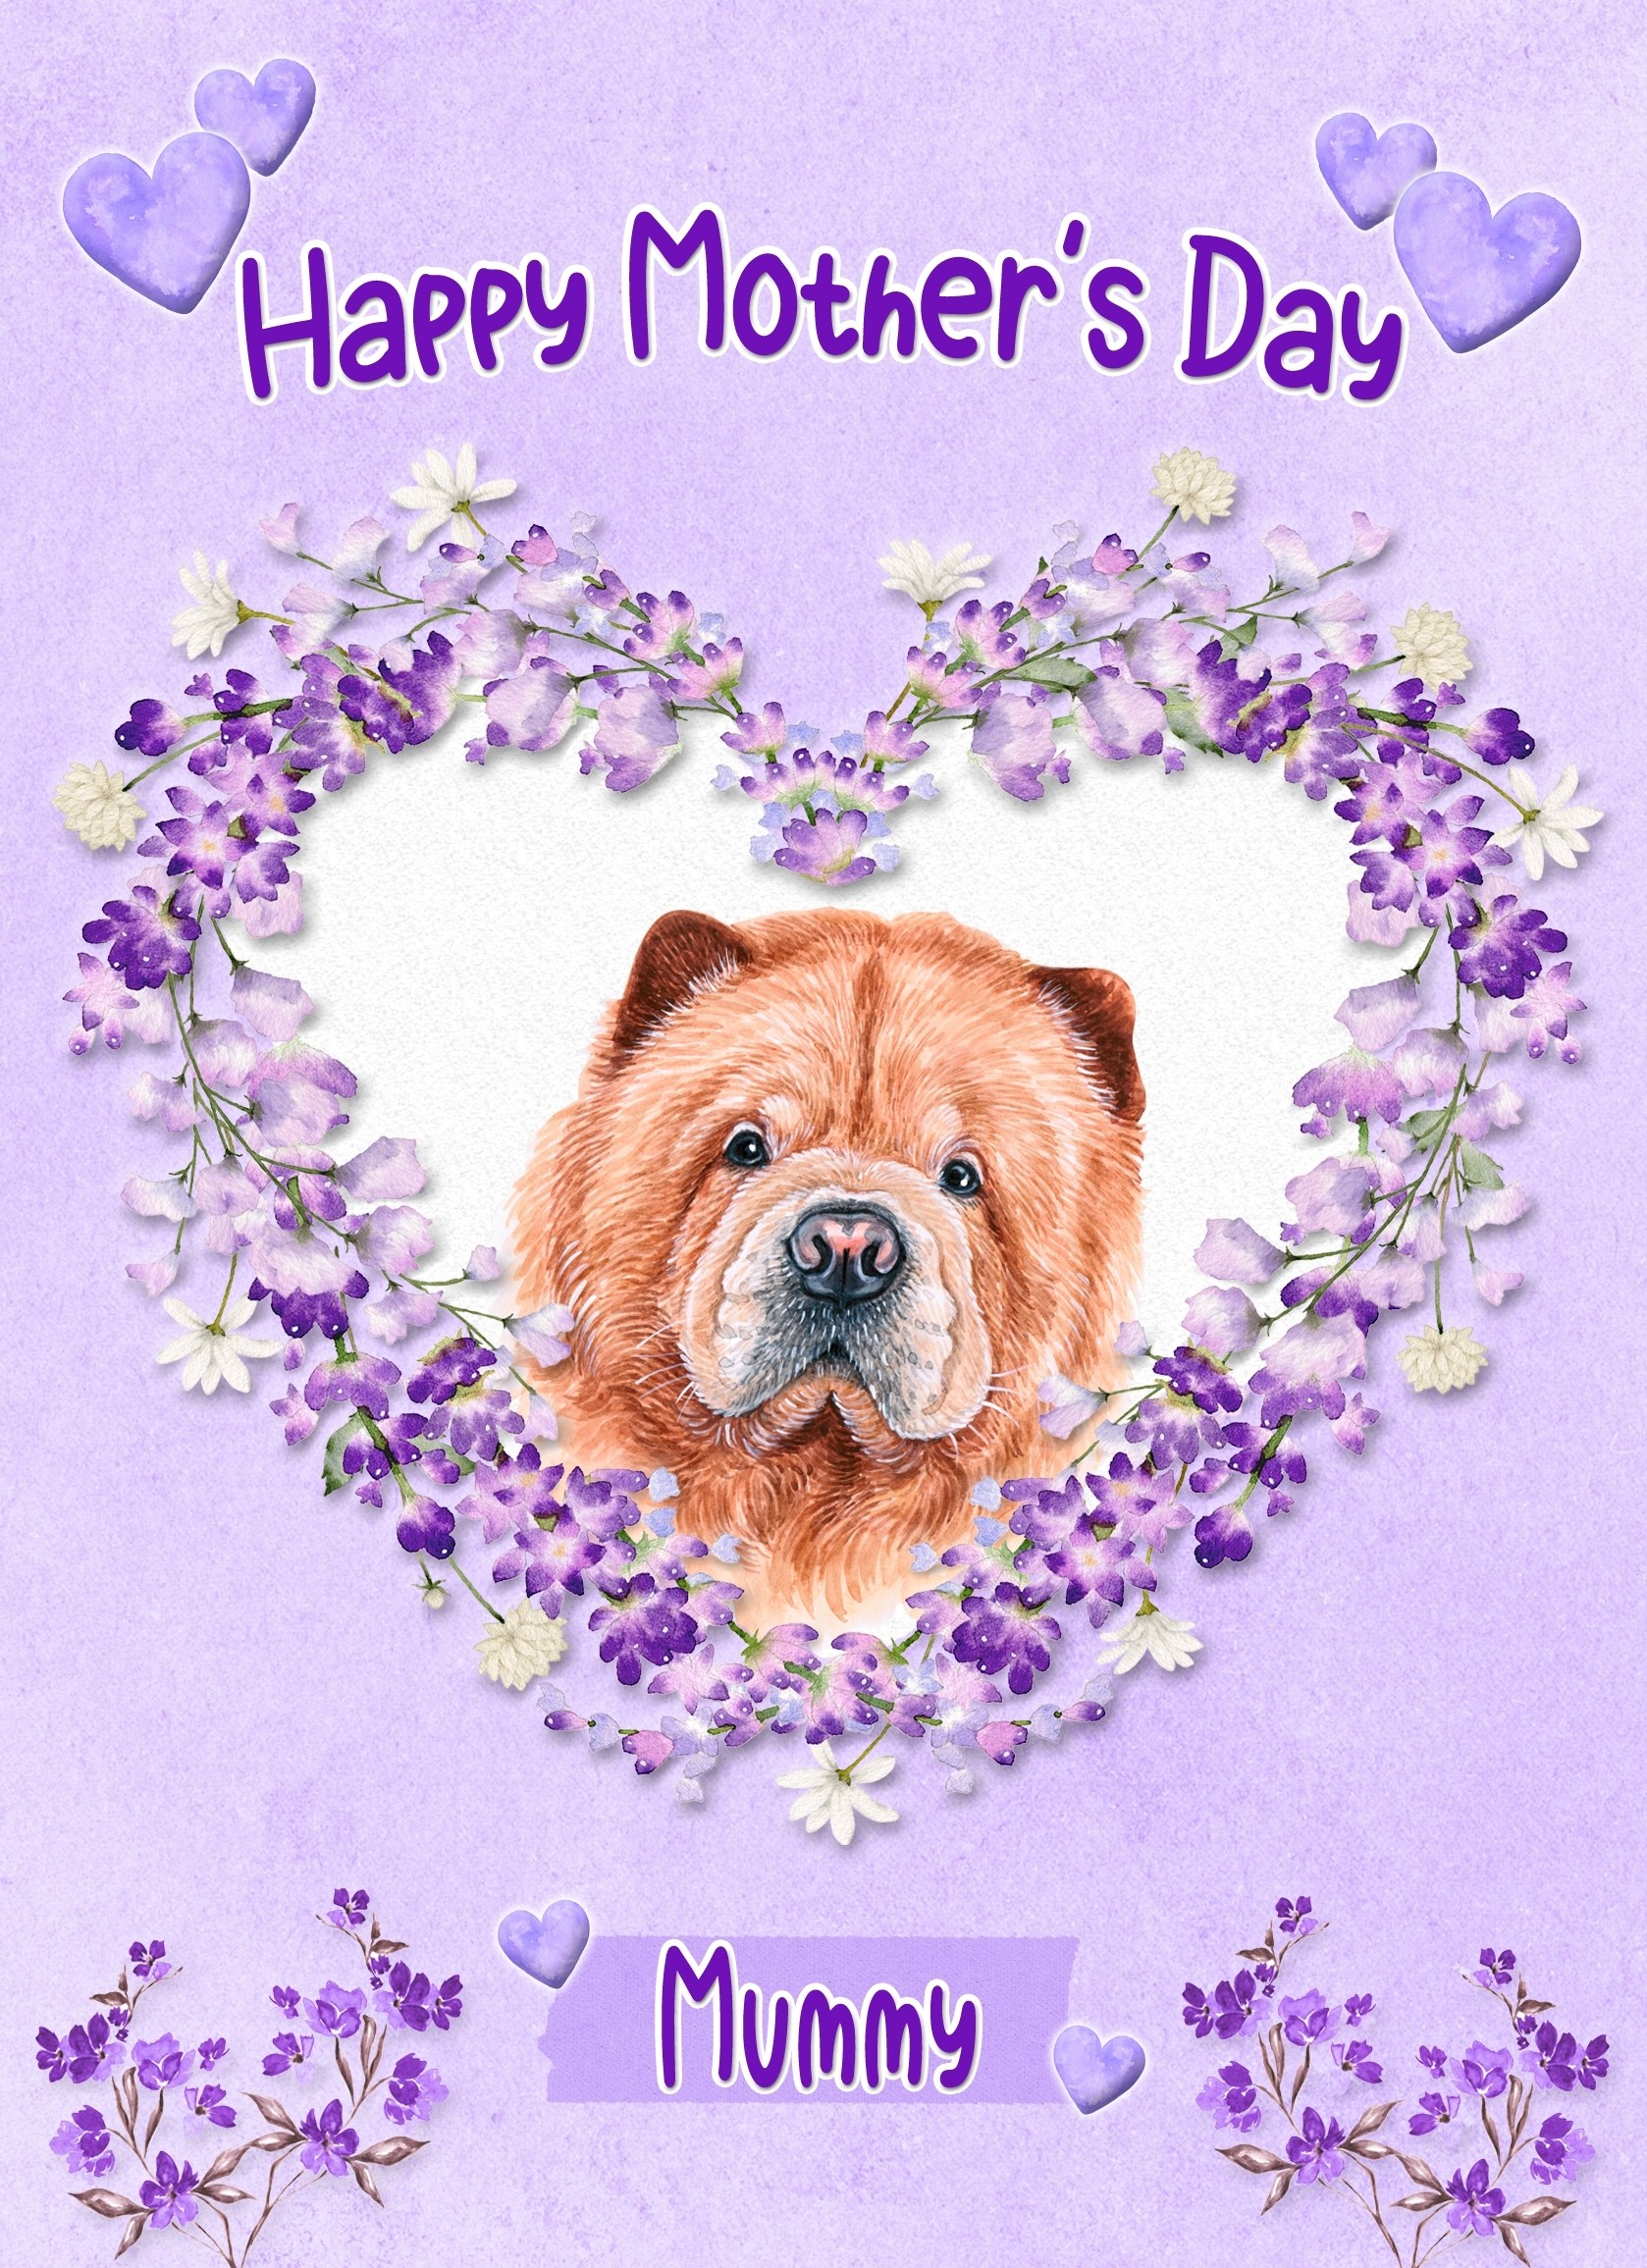 Chow Chow Dog Mothers Day Card (Happy Mothers, Mummy)